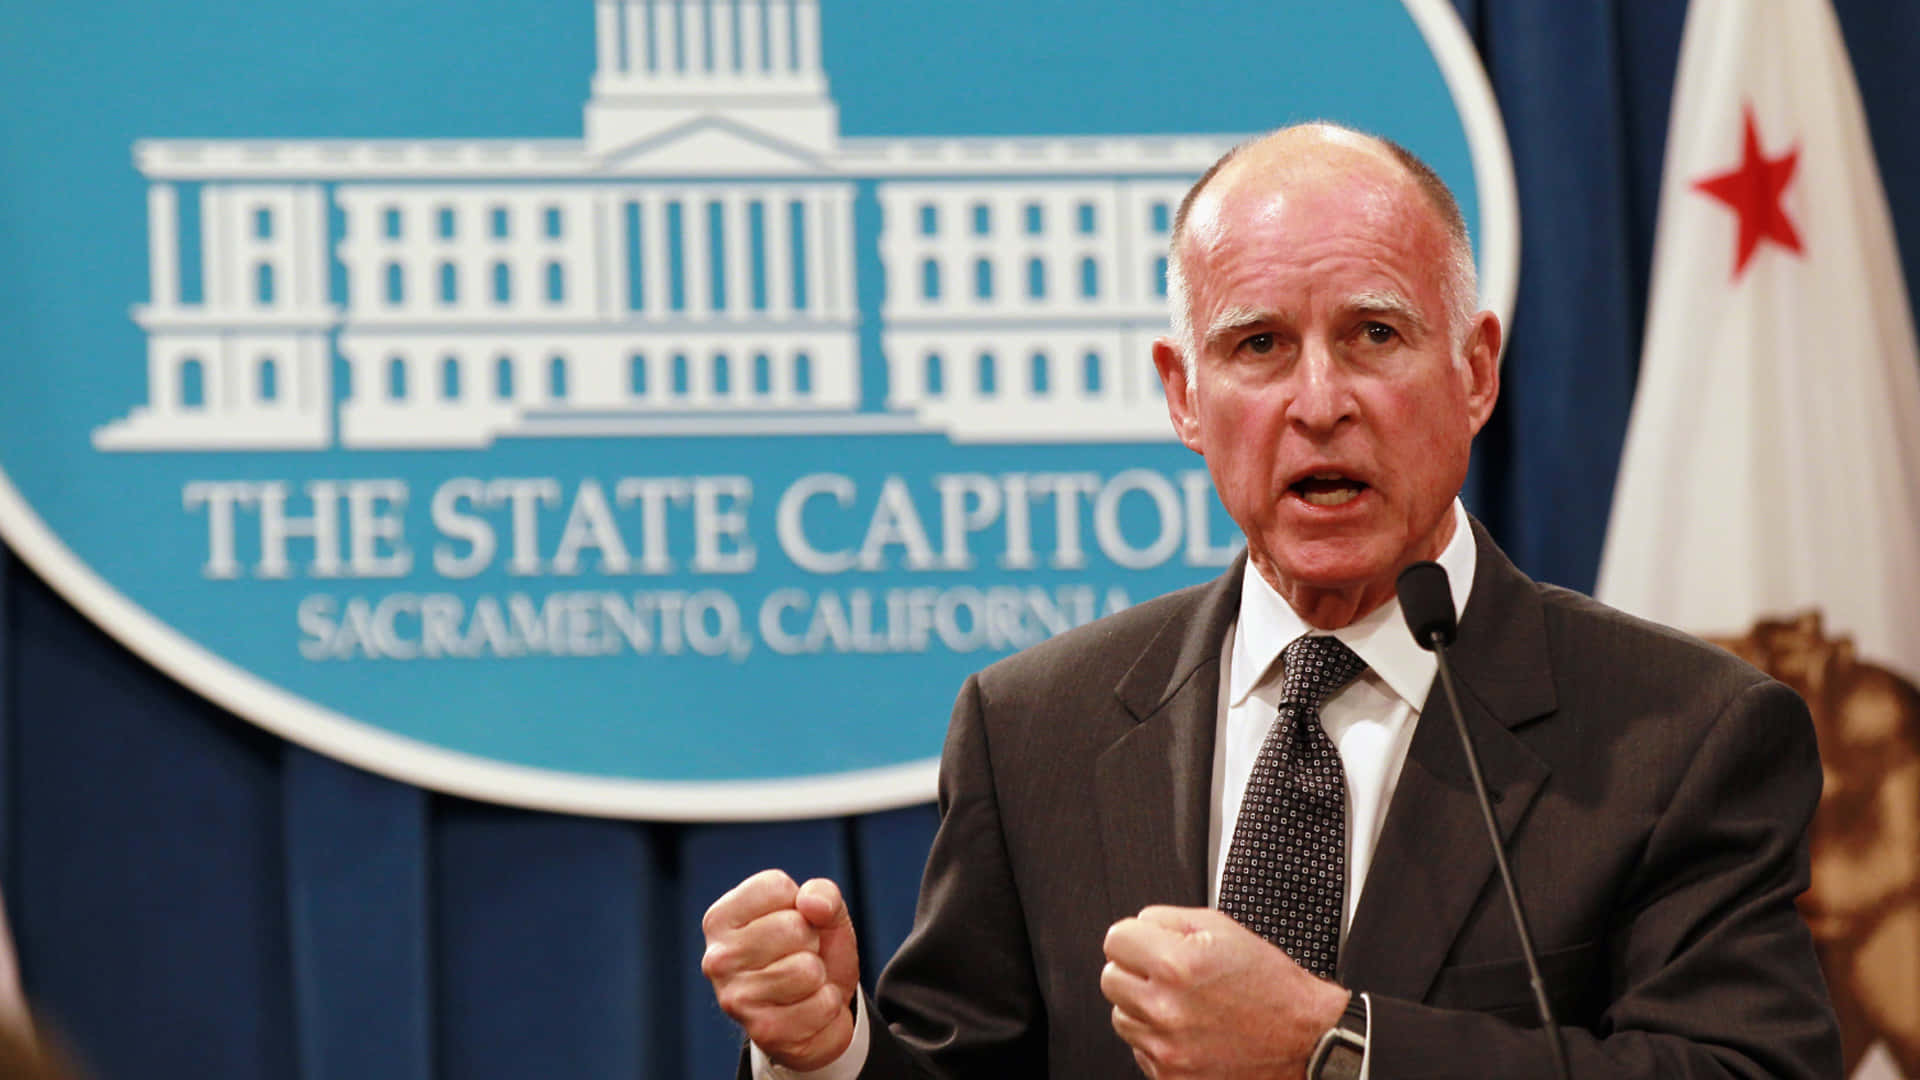 California Governor Jerry Brown speaking at the State Capitol Wallpaper